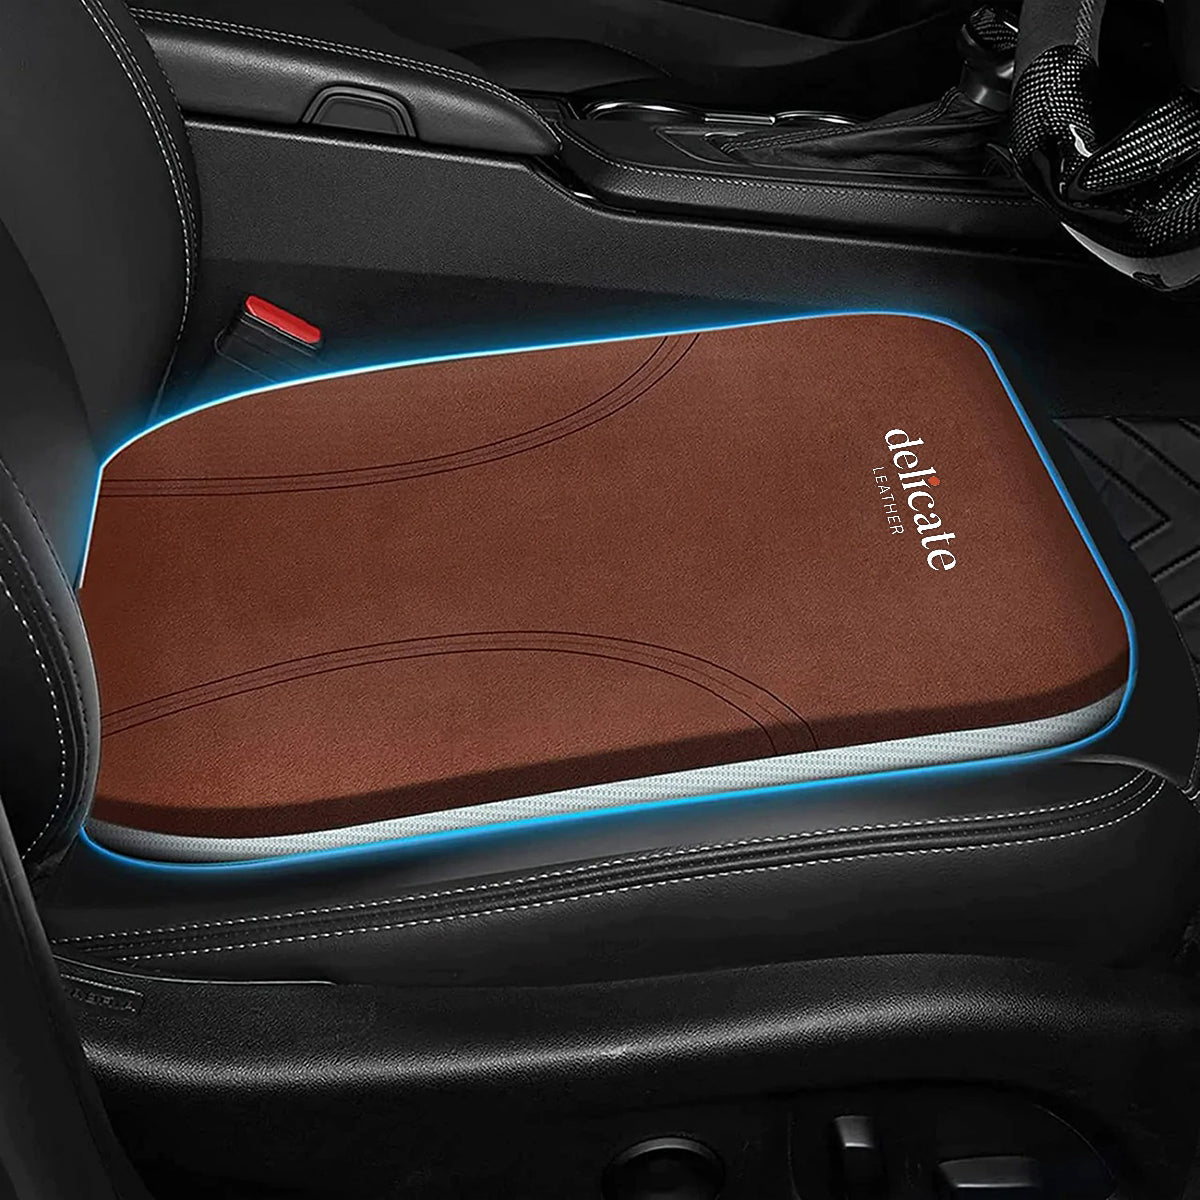 Nissan Car Seat Cushion: Enhance Comfort and Support for Your Drive